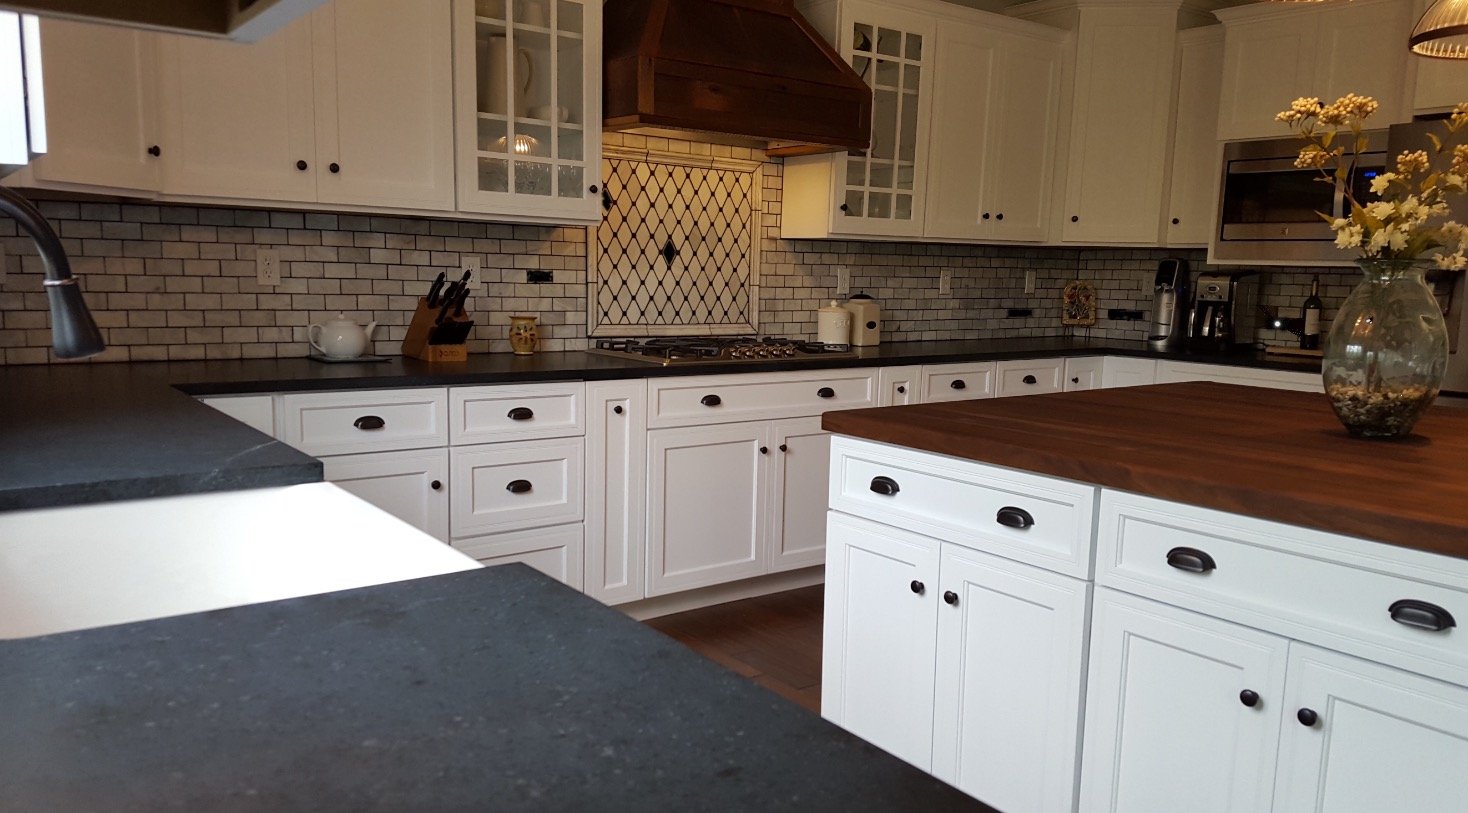 What Color Granite Goes With White Cabinets?